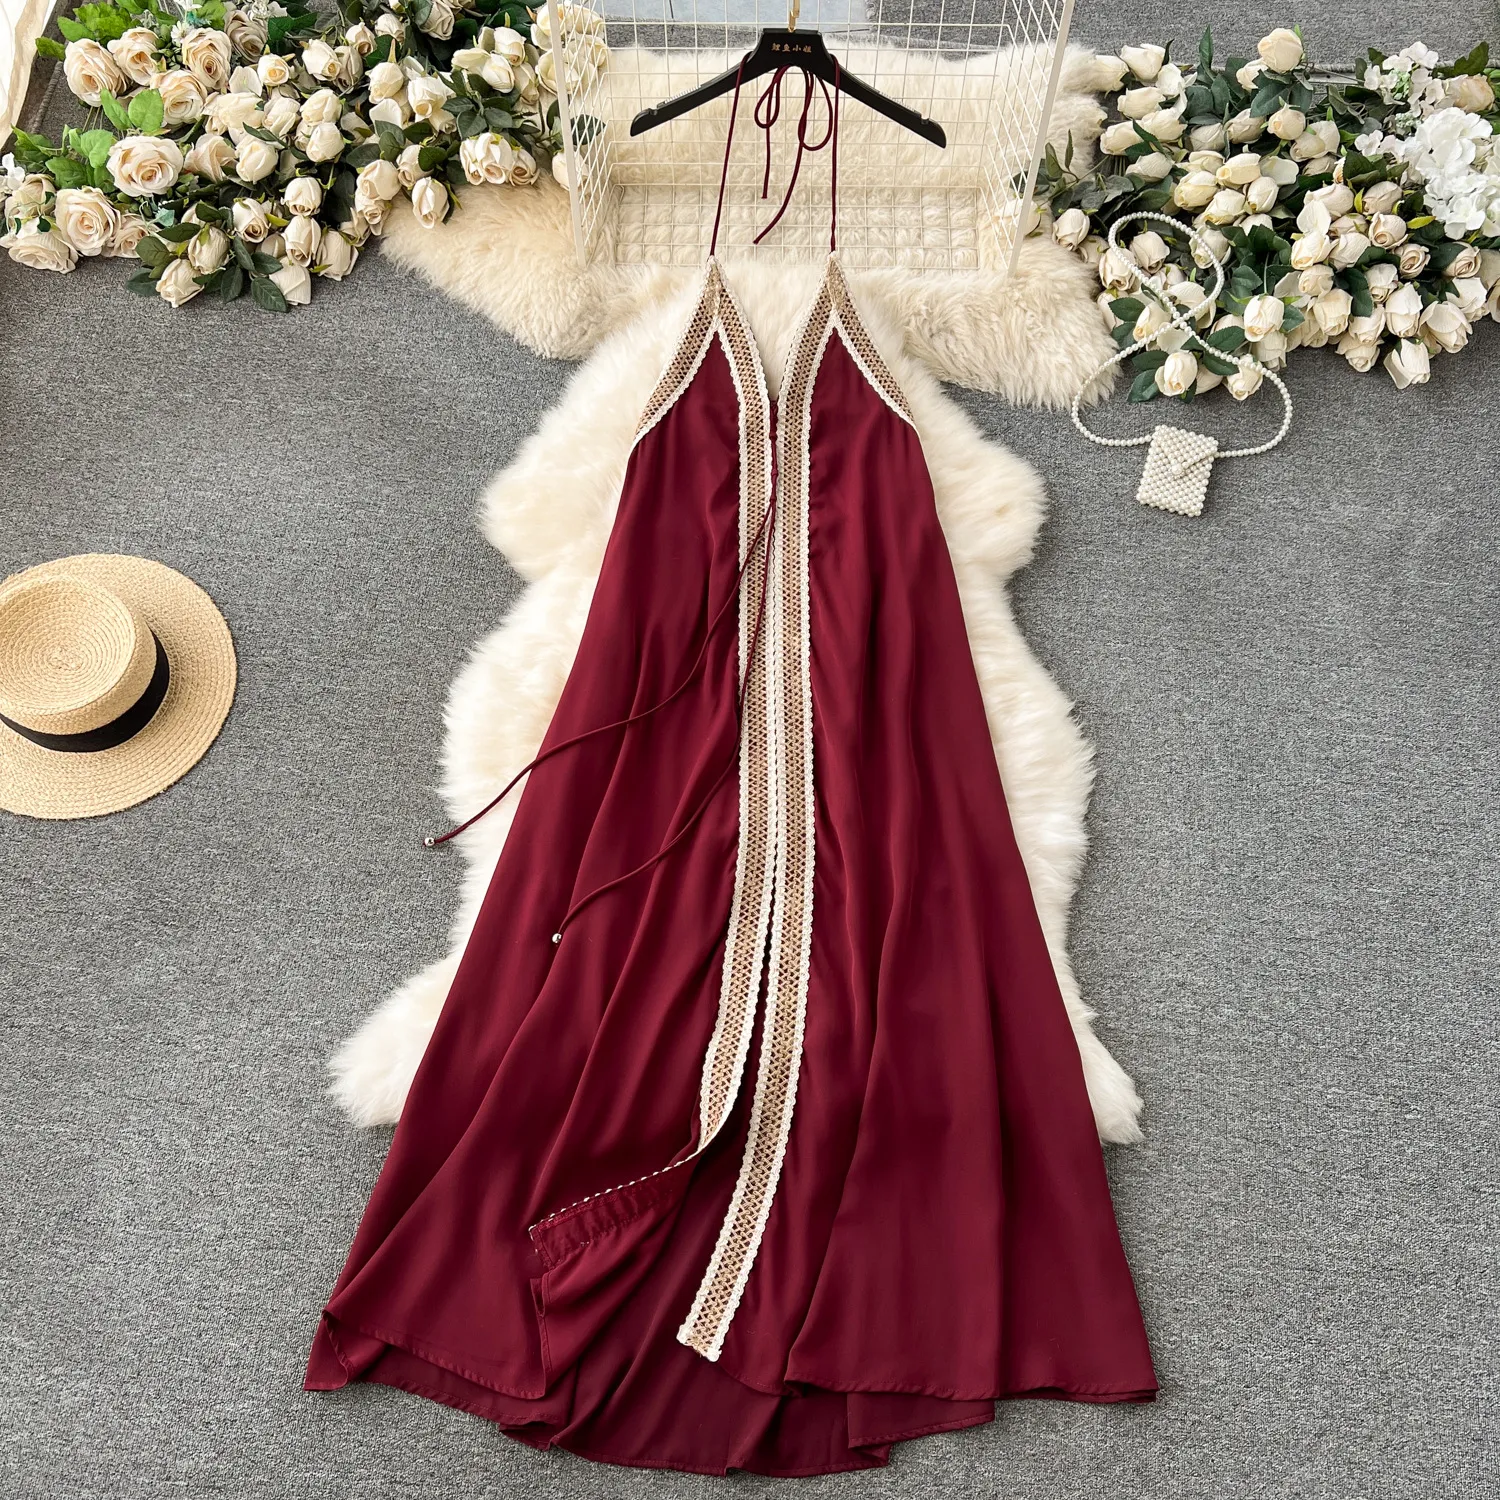 Retro ethnic style heavy industry woven pattern color contrast splicing slim fit long sexy backless hanging neck dress vacation dress